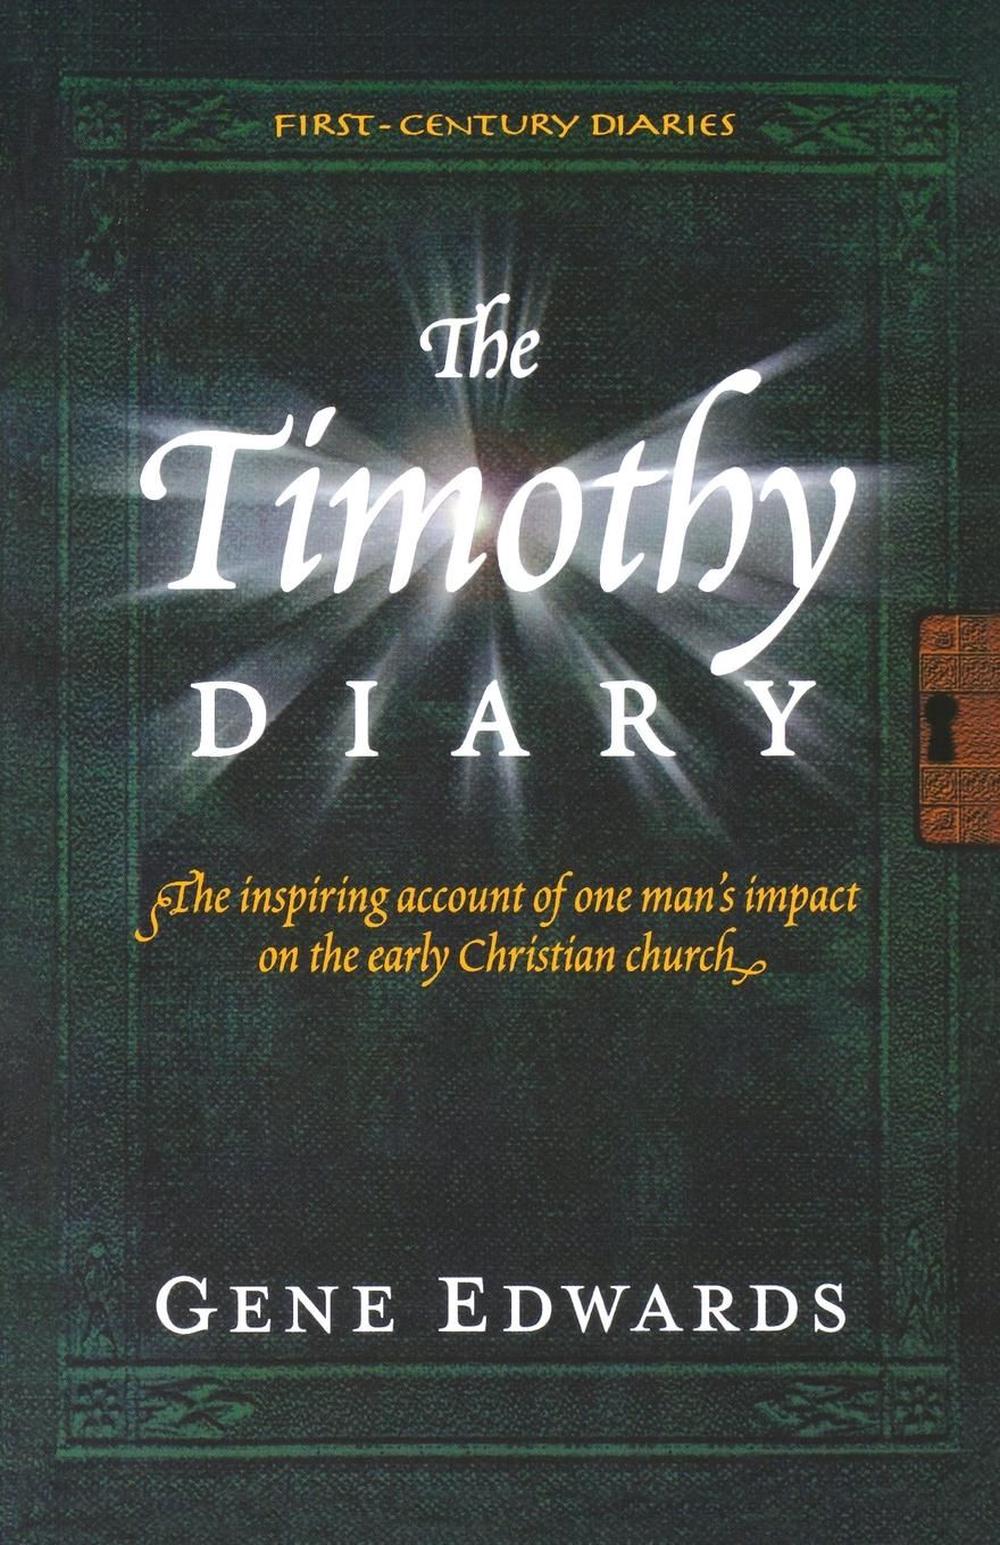 the diary of a nobody